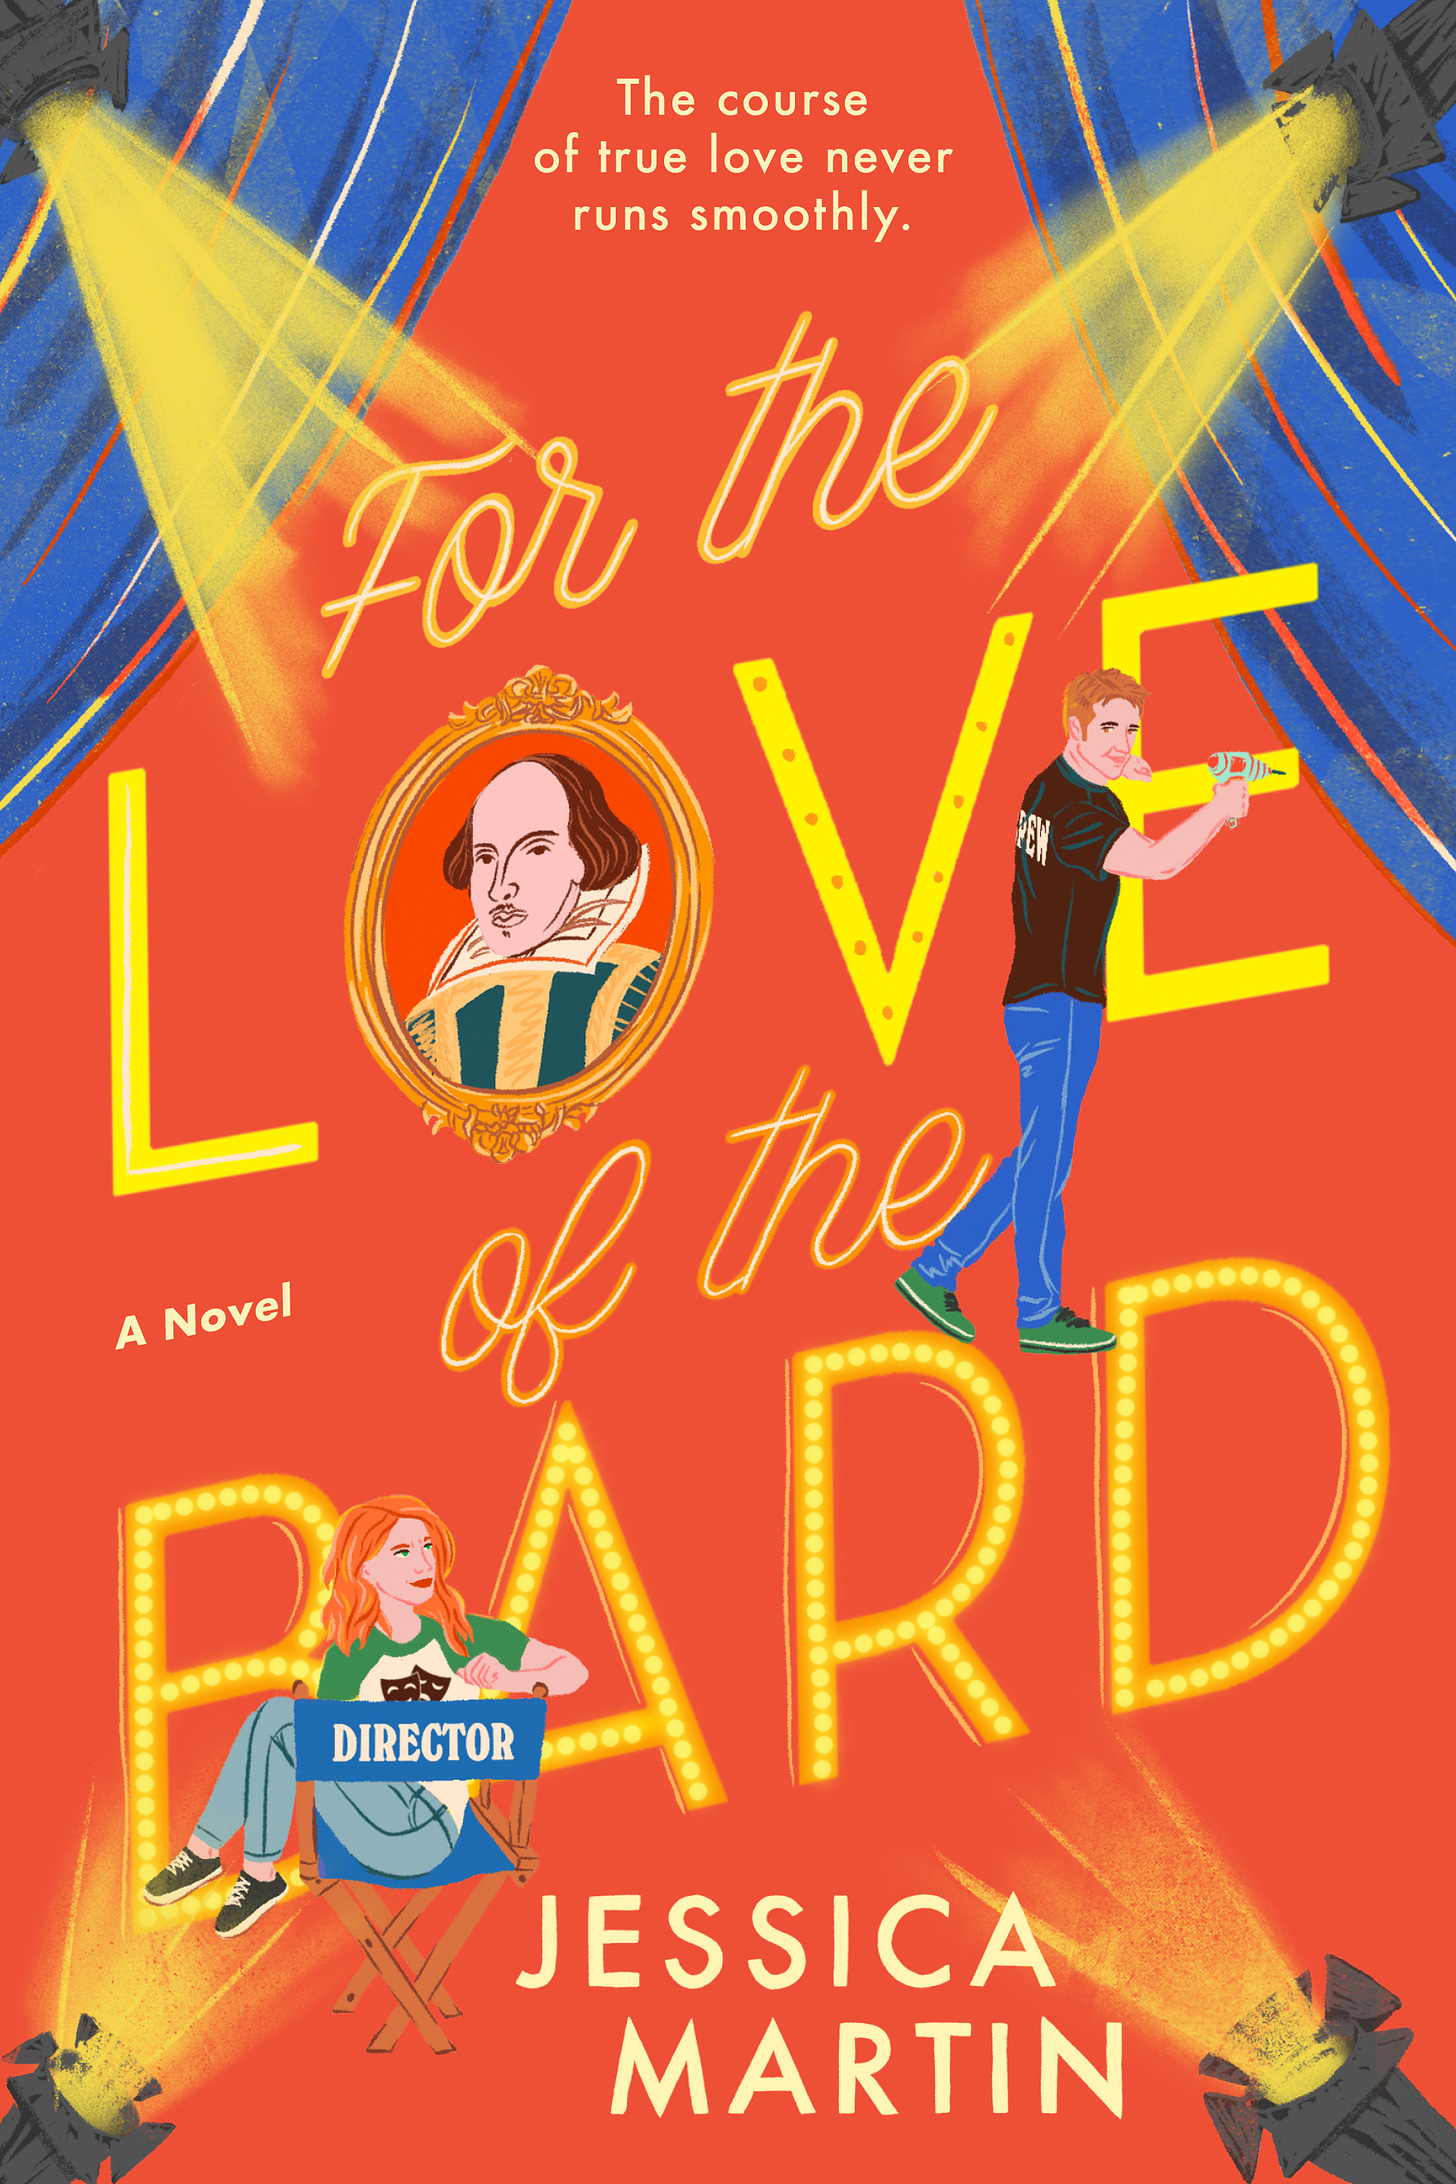 For the Love of the Bard by Jessica Martin | Goodreads